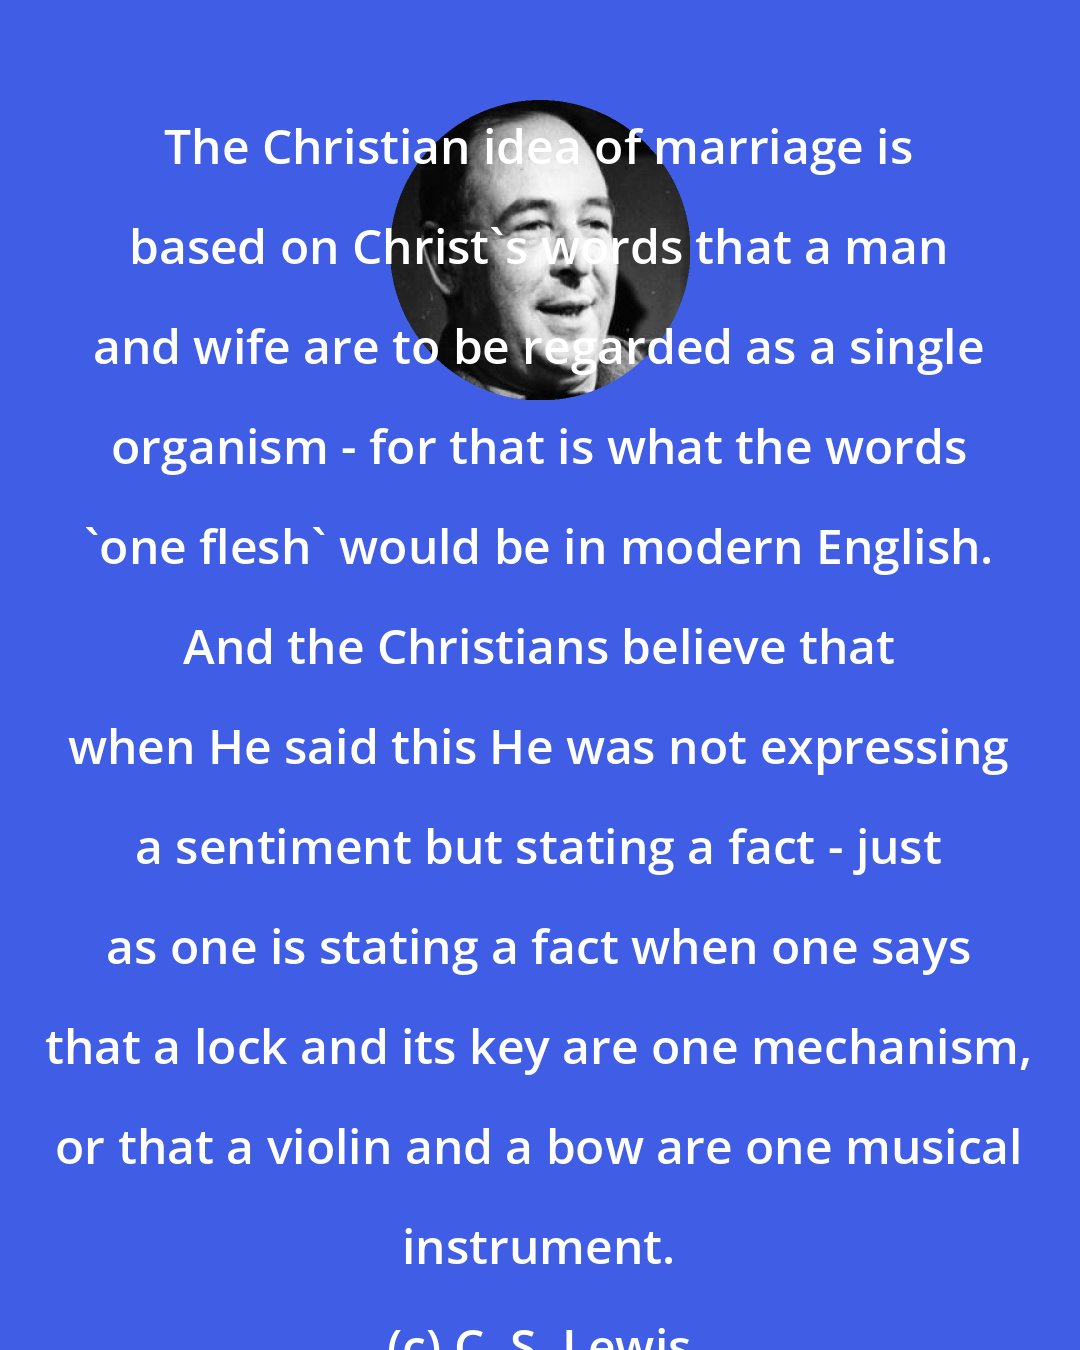 C. S. Lewis: The Christian idea of marriage is based on Christ's words that a man and wife are to be regarded as a single organism - for that is what the words 'one flesh' would be in modern English. And the Christians believe that when He said this He was not expressing a sentiment but stating a fact - just as one is stating a fact when one says that a lock and its key are one mechanism, or that a violin and a bow are one musical instrument.